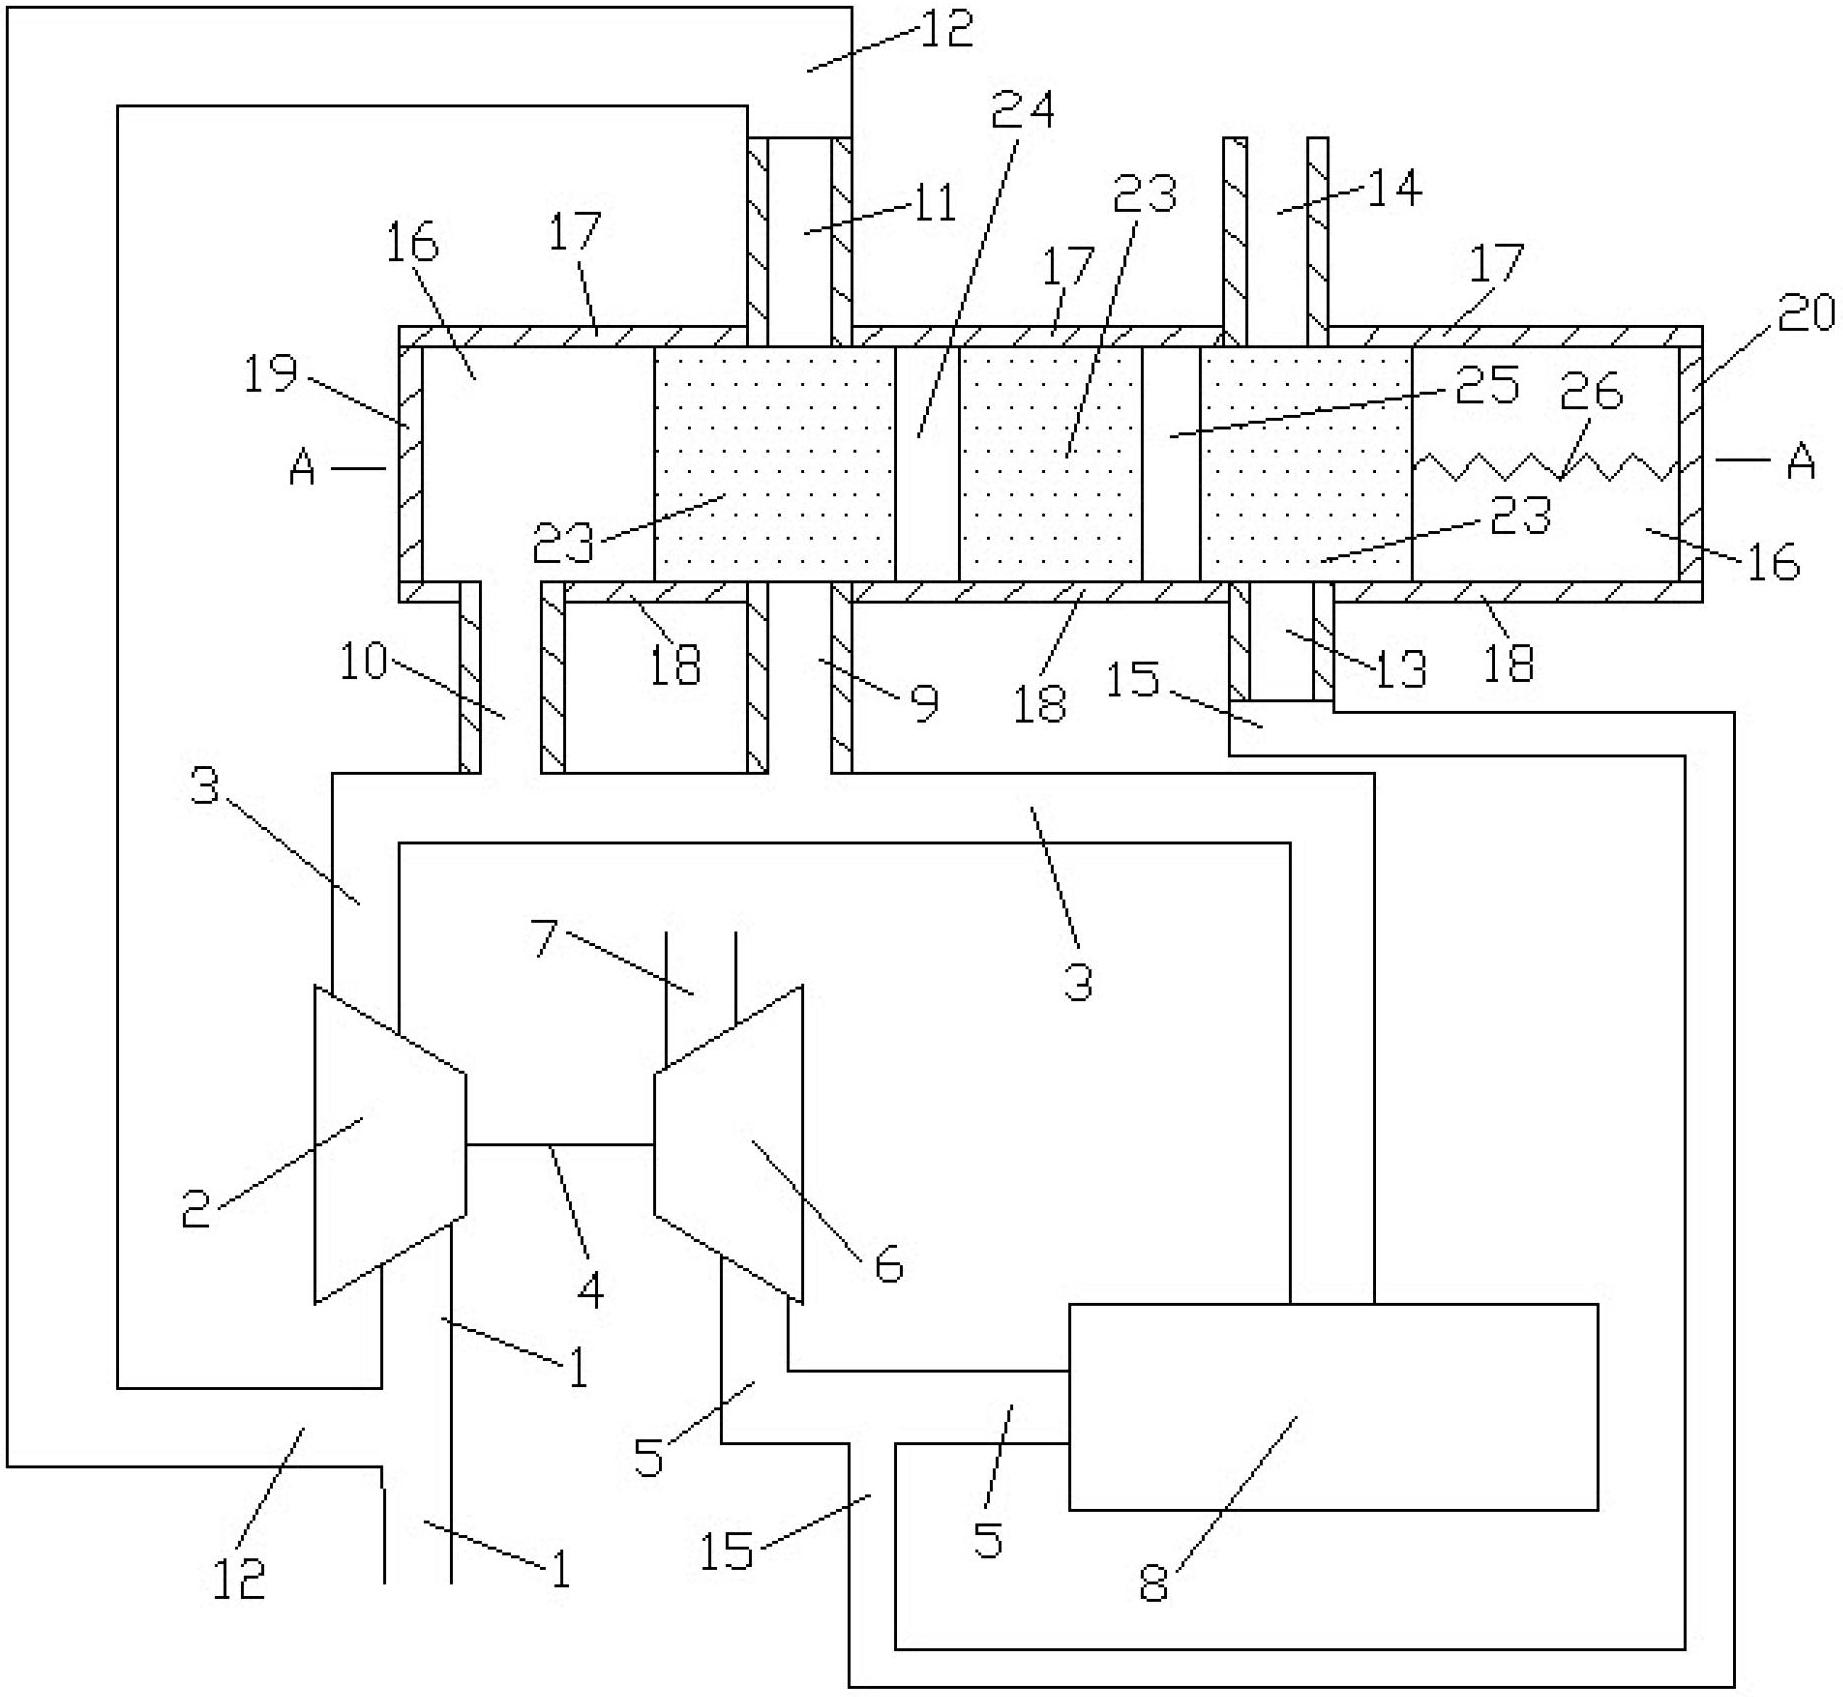 Air feeding and discharging adjustment system with multiple connection pipes